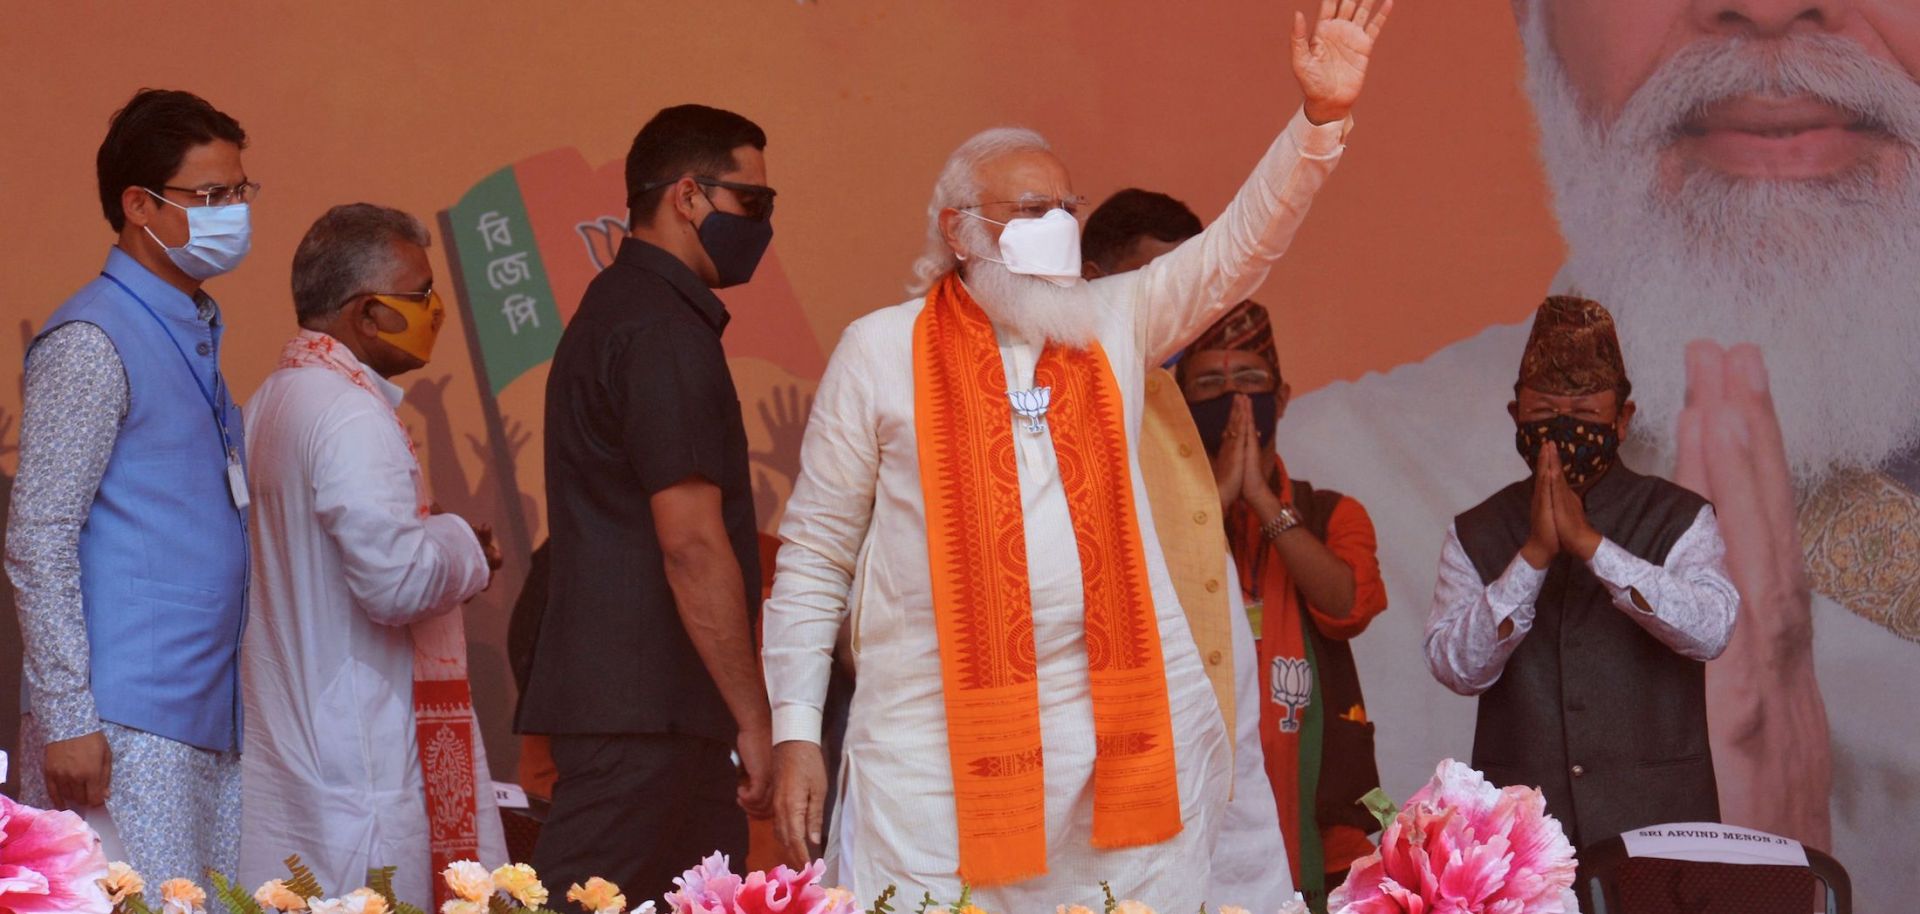 Indian Prime Minister Narendra Modi (C) at a rally during West Bengal state's assembly election April 10, 2021, at Kawakhali on the outskirts of Siliguri.